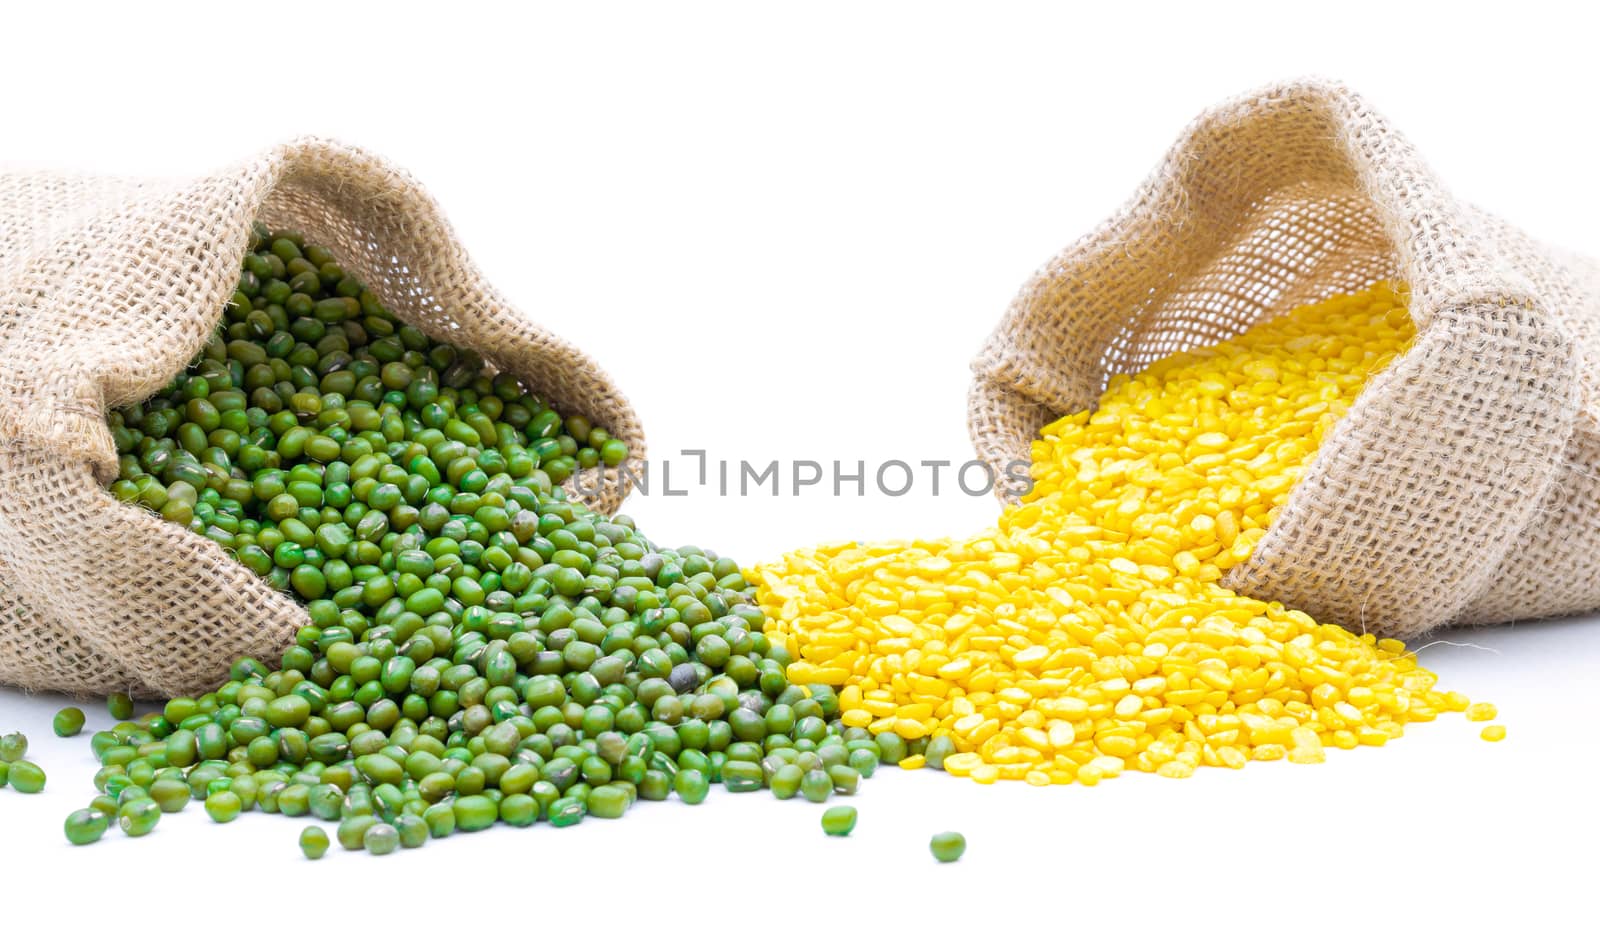 Grains Mung bean in a sack on a white background by sompongtom